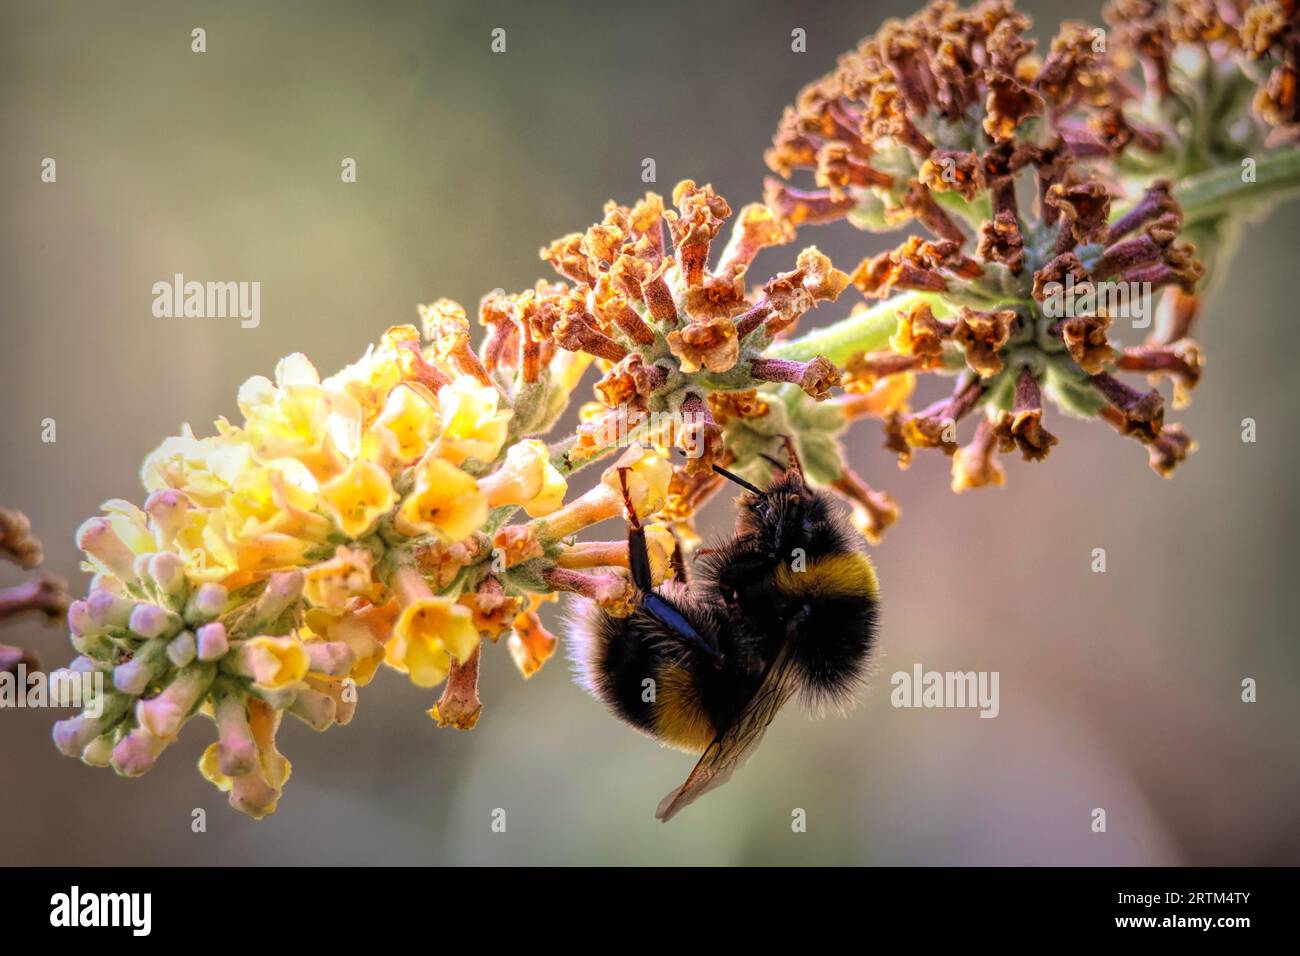 A close-up image of a bee resting peacefully on a flower Stock Photo